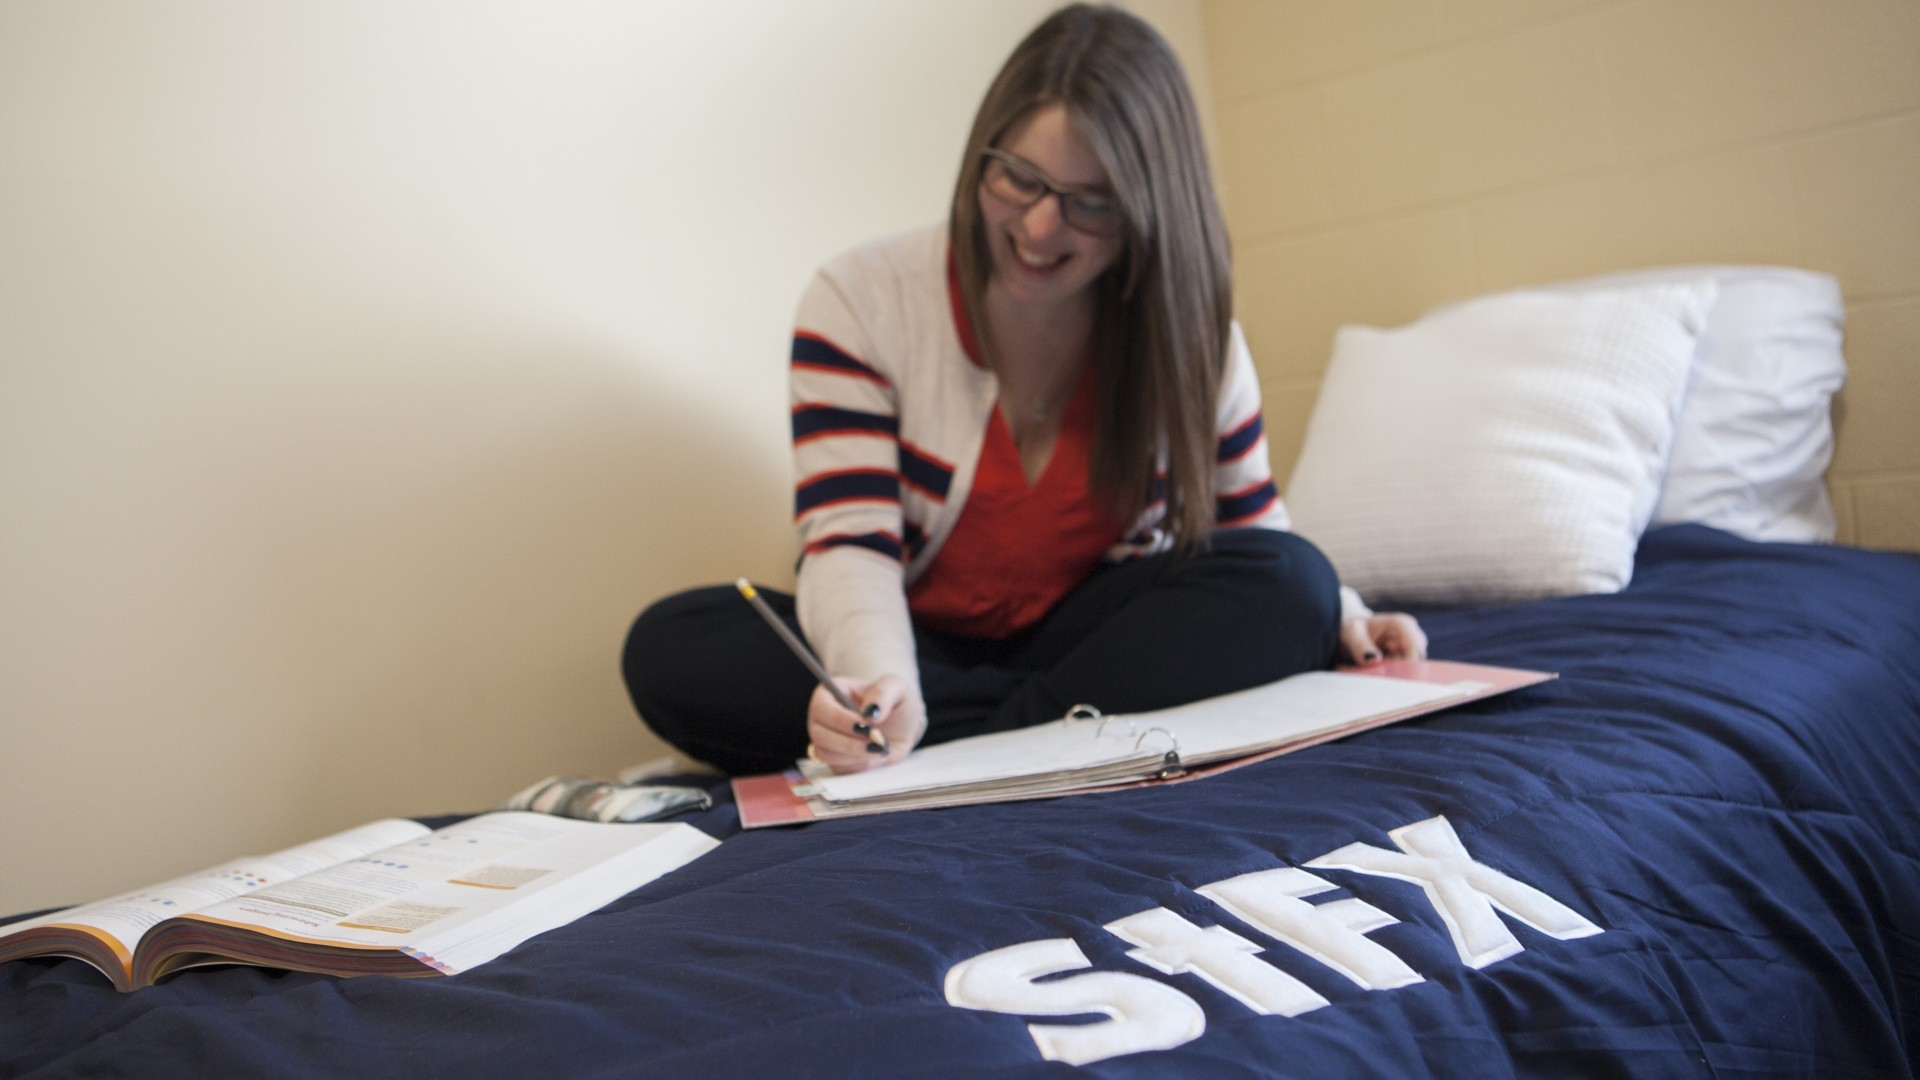 Student studying while sitting on their bed with a StFX comforter.